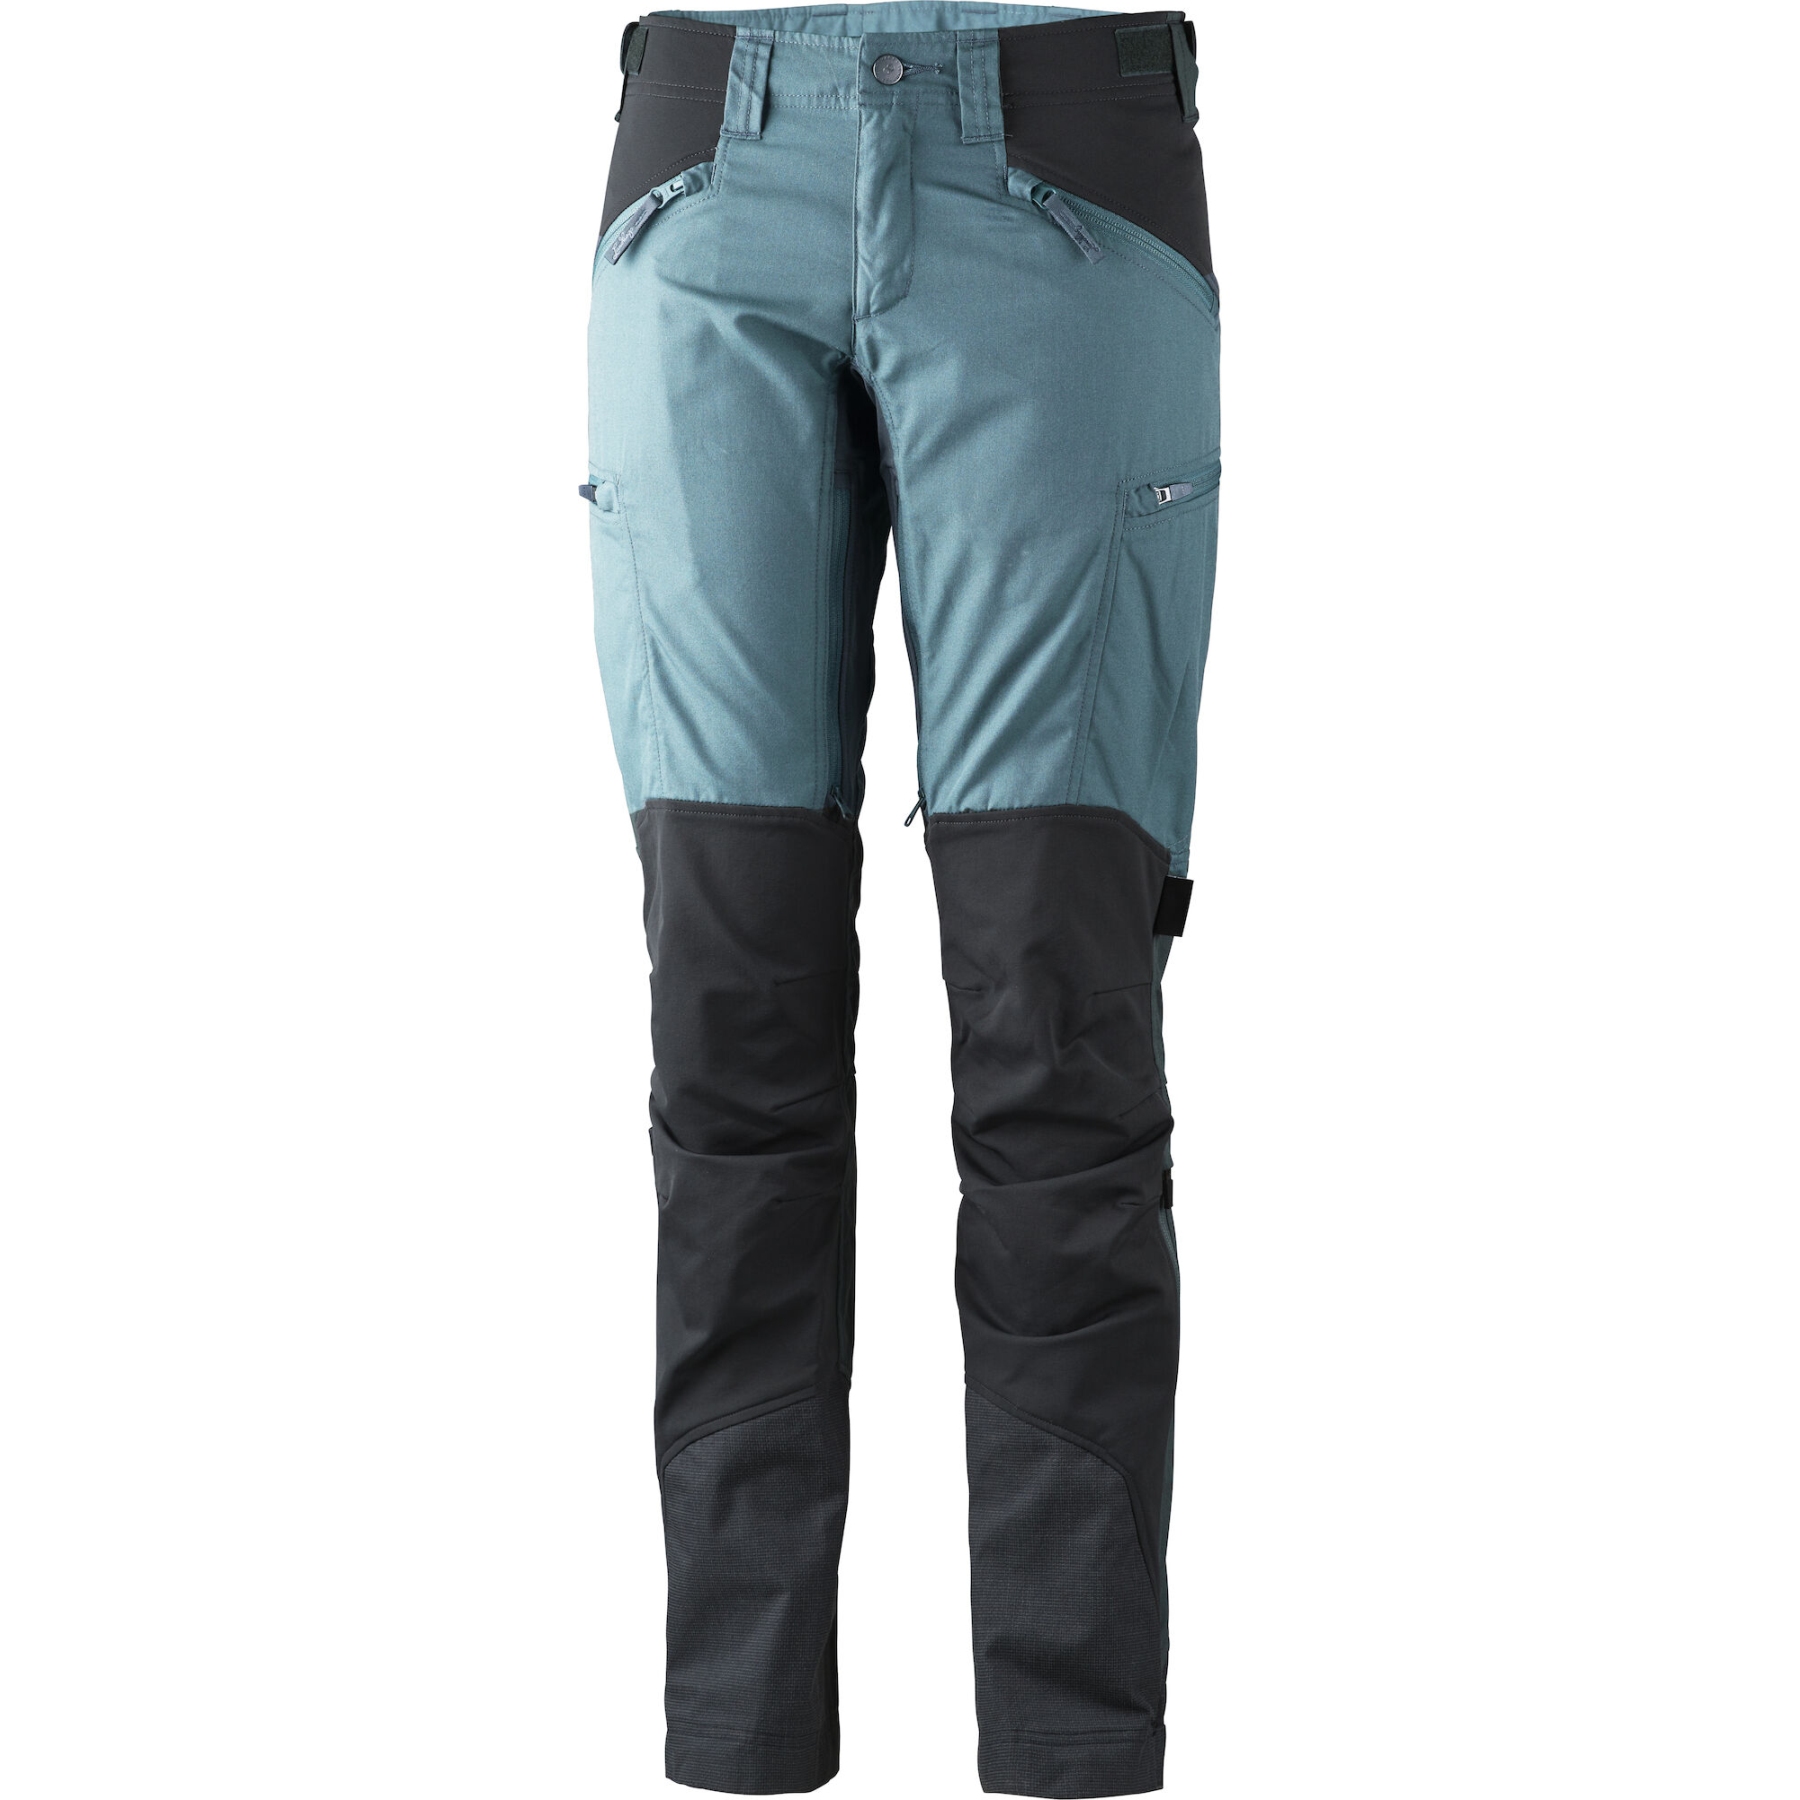 Picture of Lundhags Makke Hiking Pants Women - Fjord Blue/Charcoal 72252